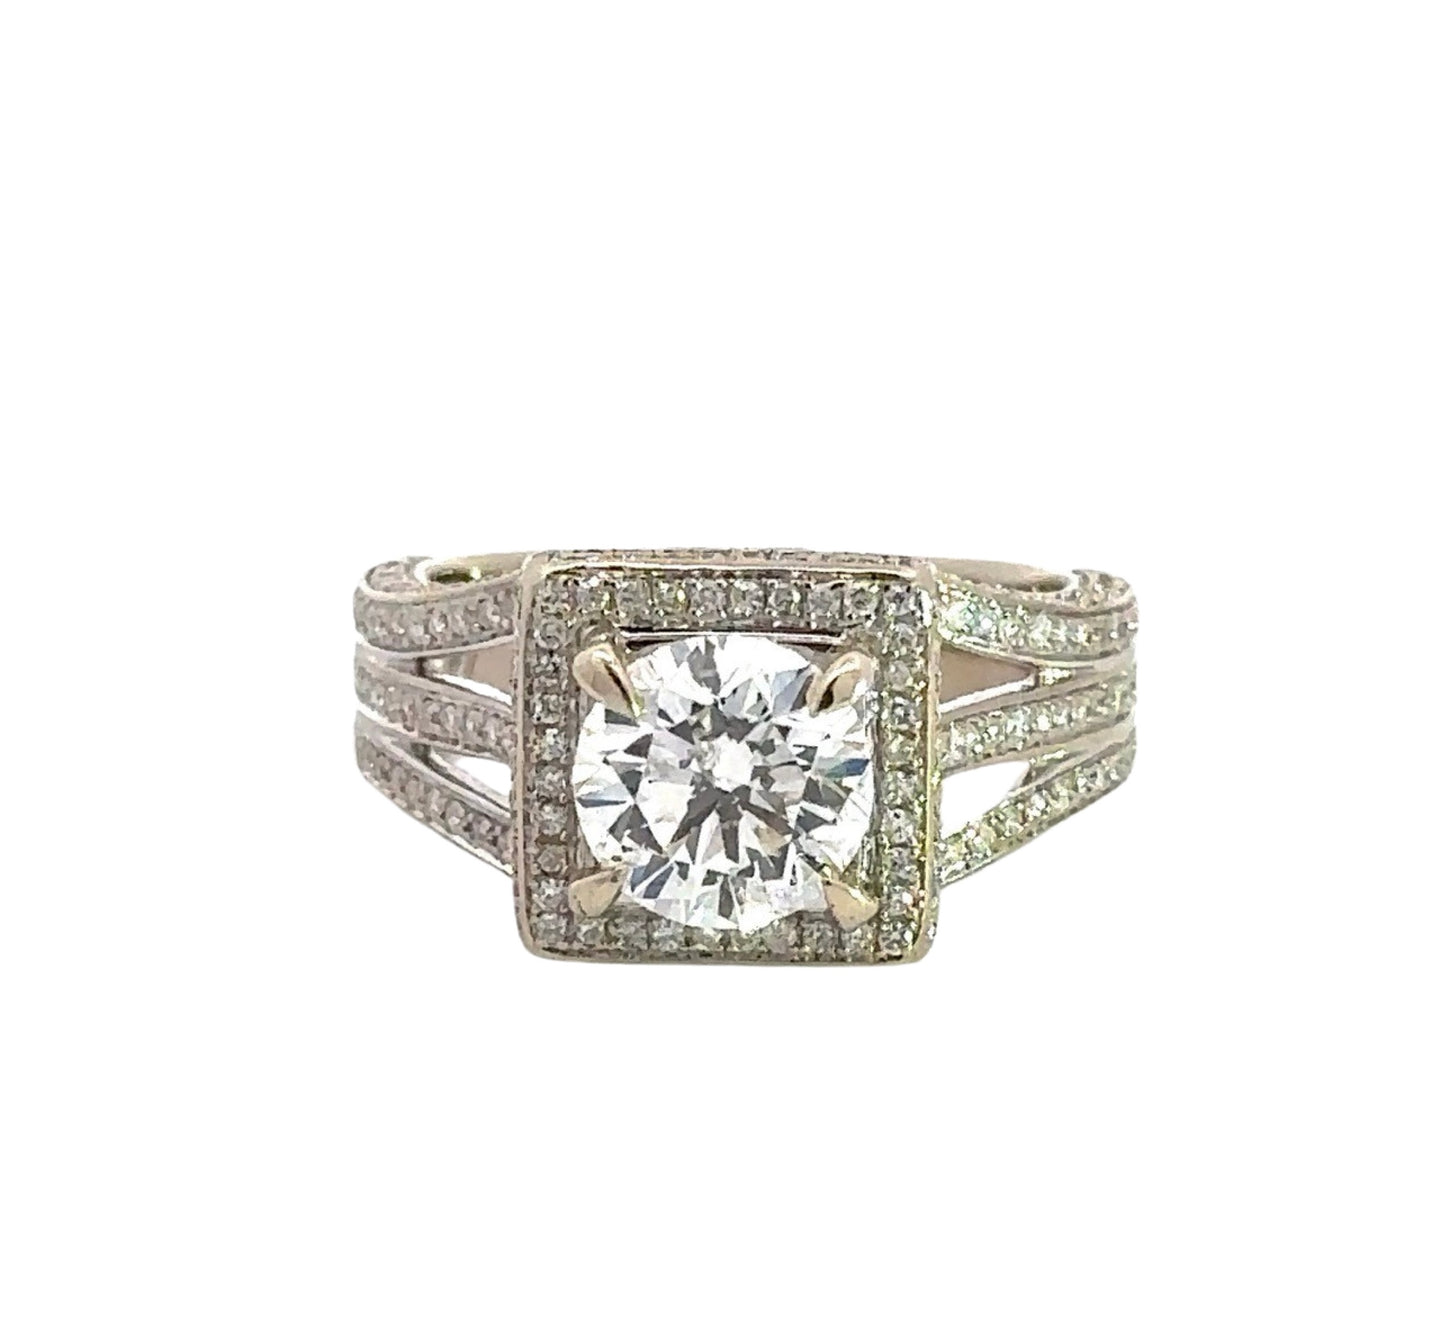 top of 1.75 carat center-stone diamond ring with small round diamonds around center-stone and on band in 3 rows